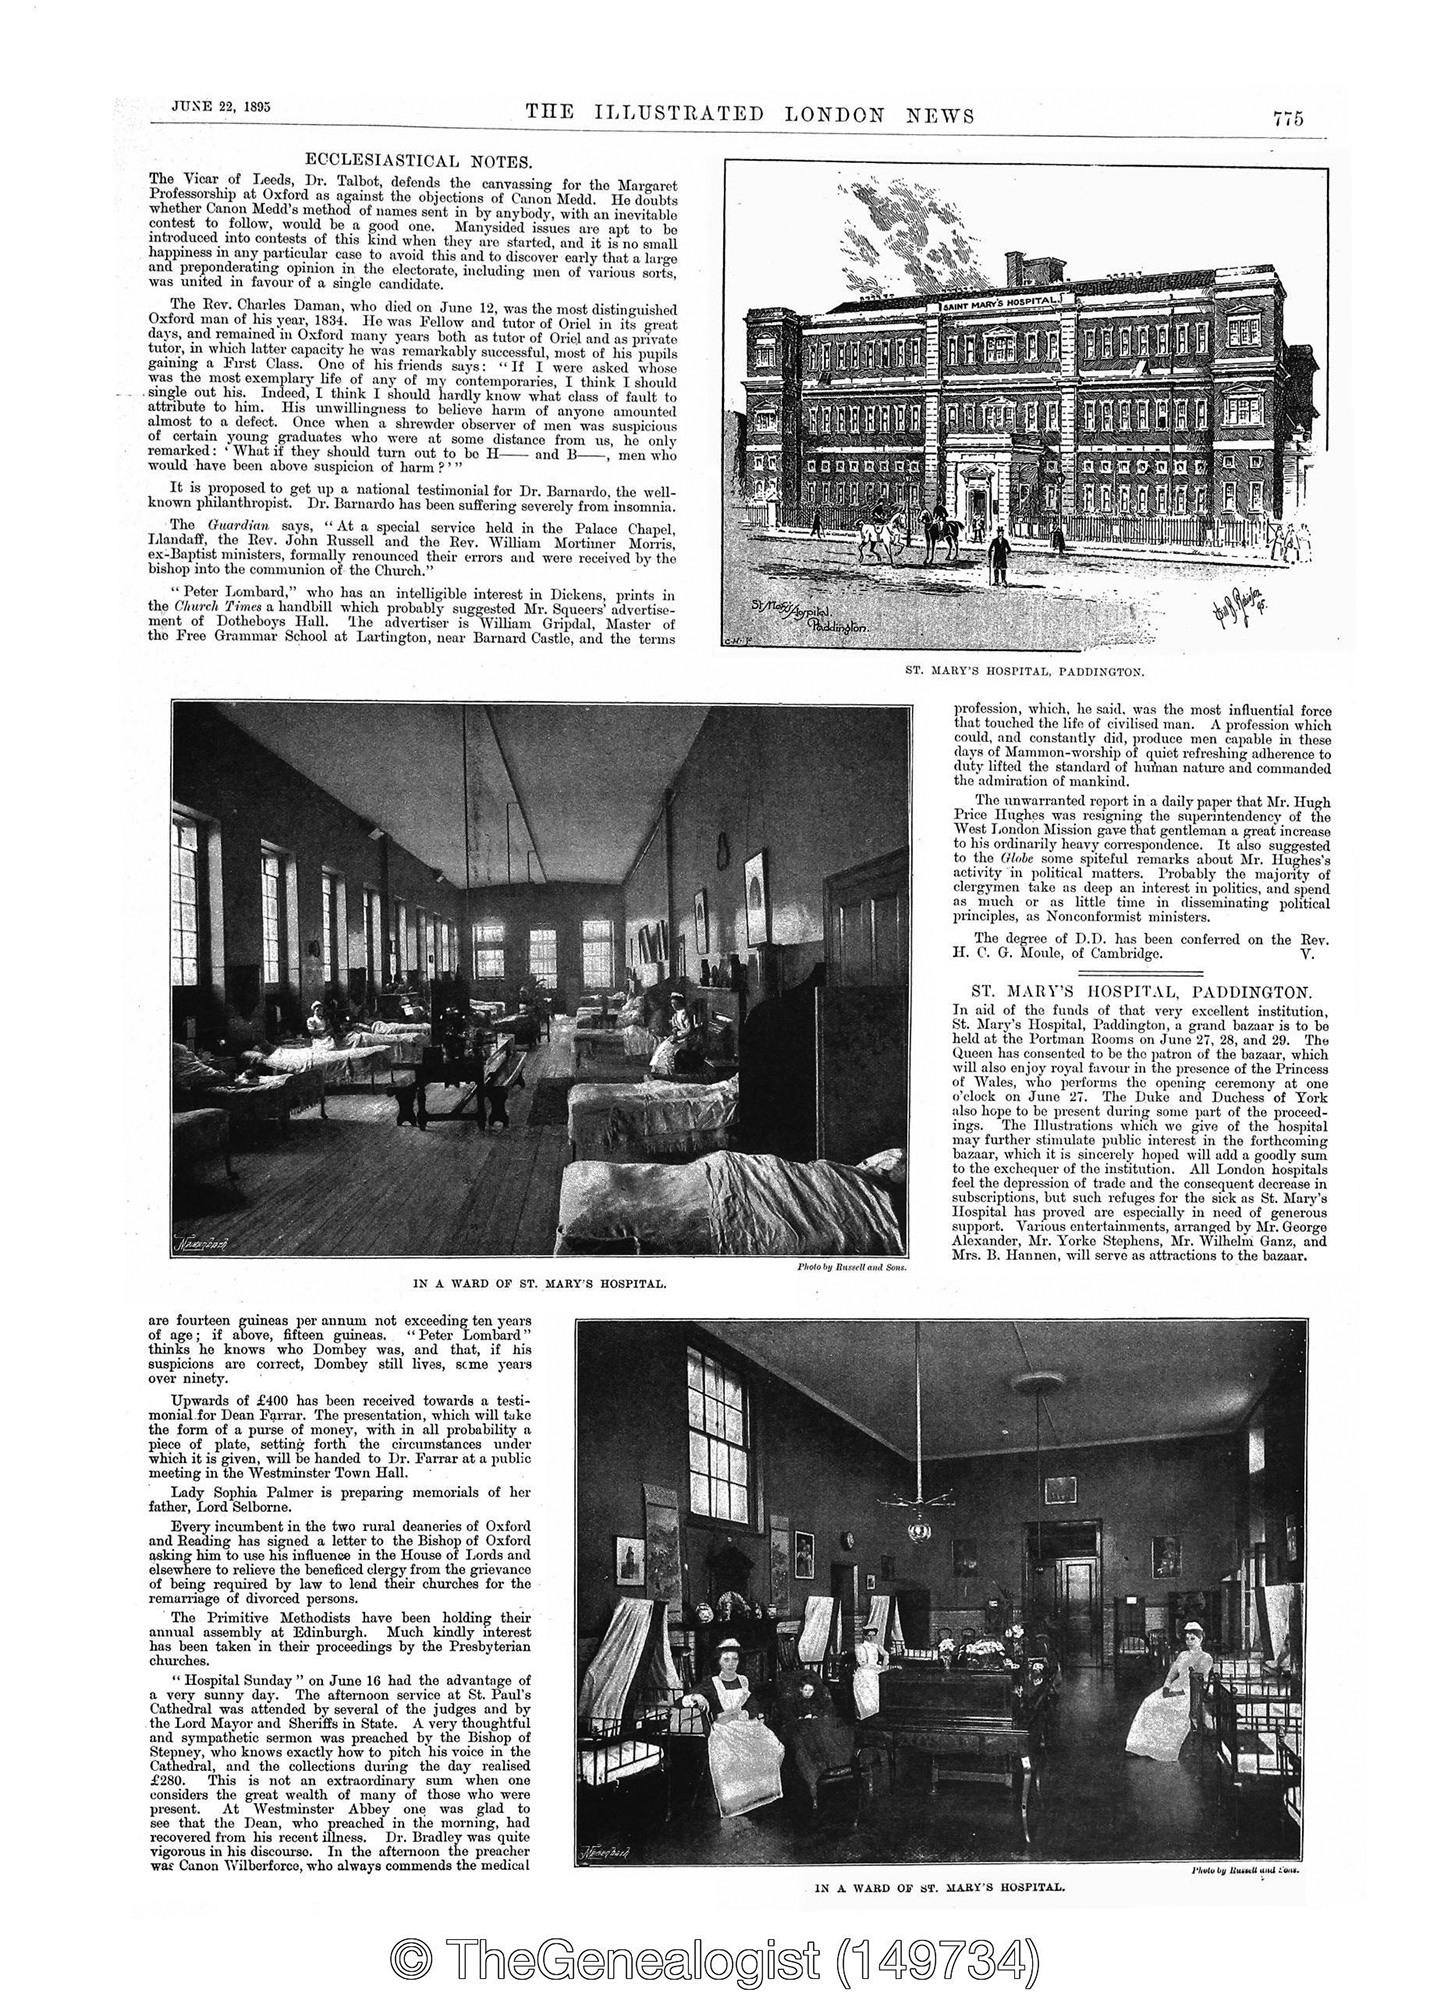 The Illustrated London News June 1895